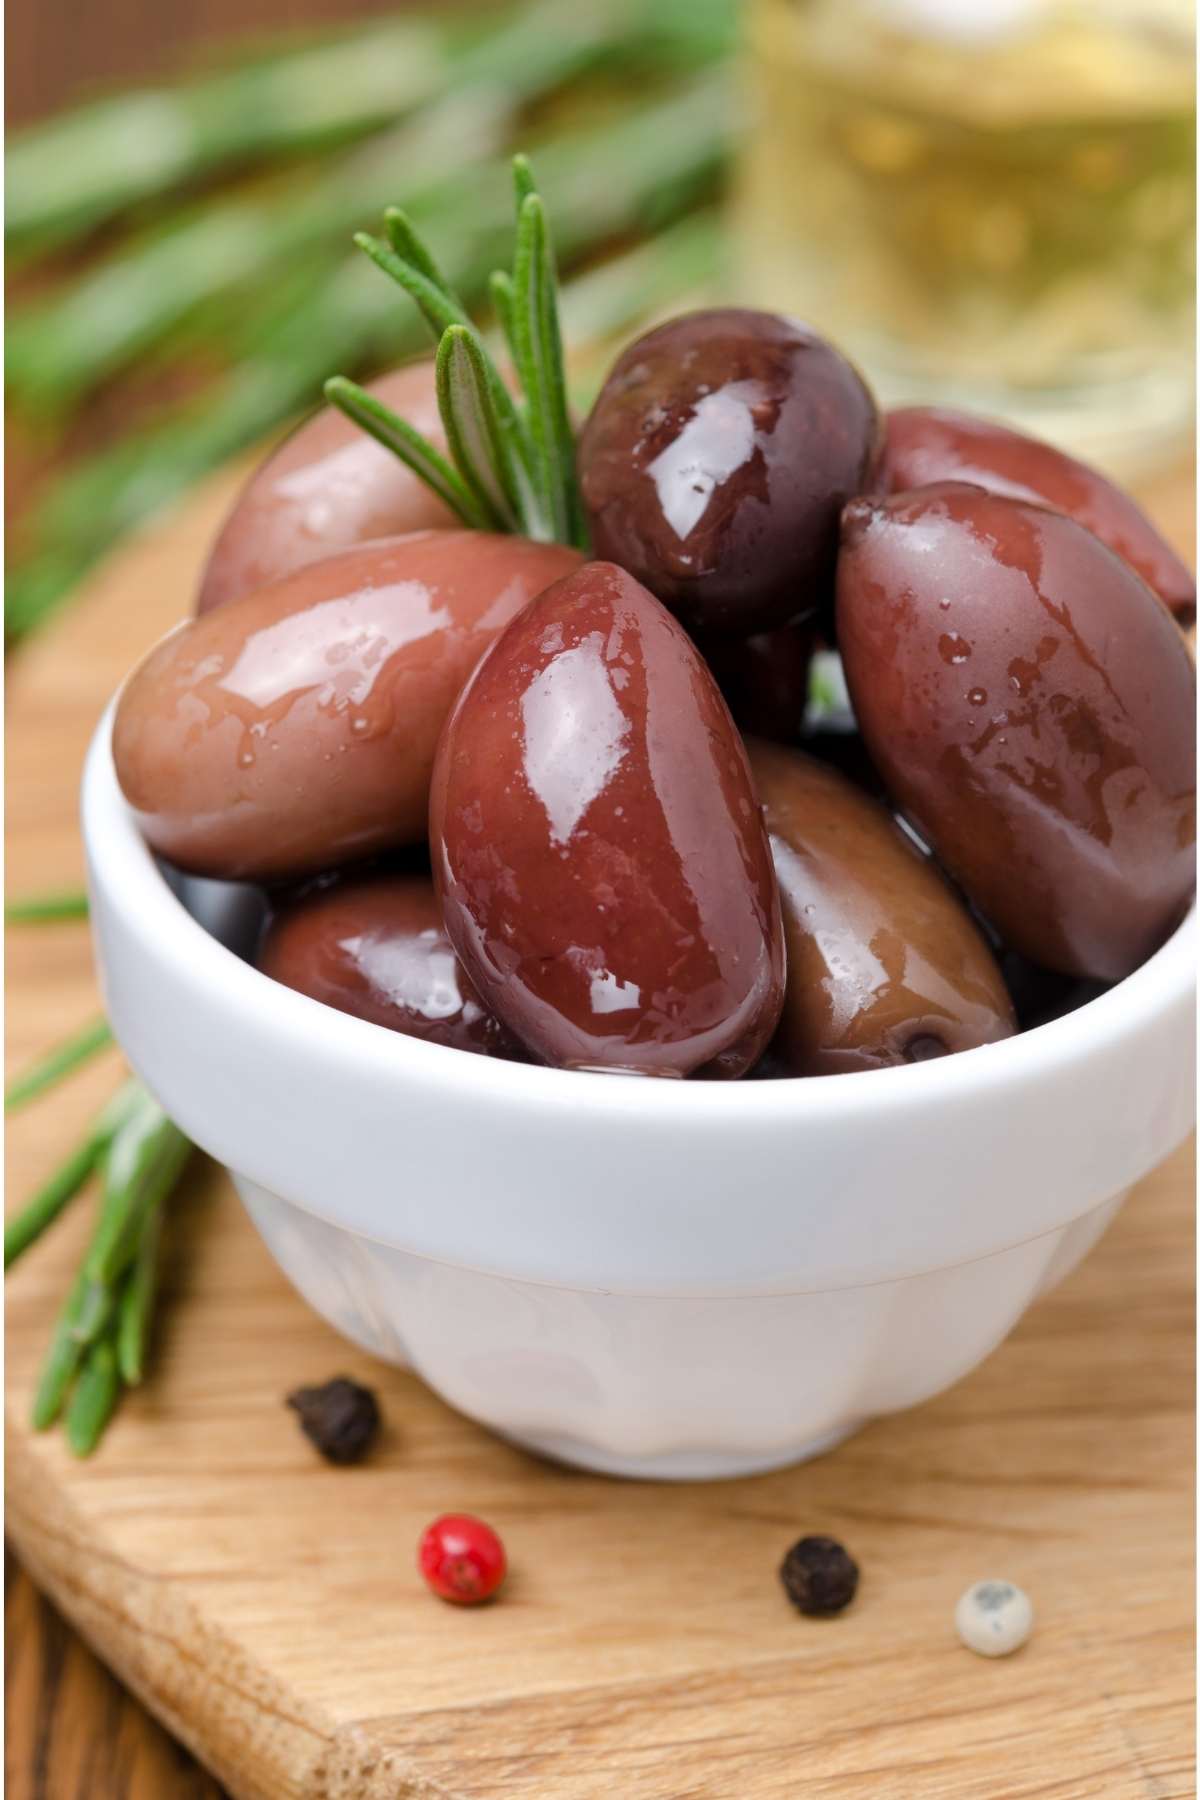 Olives are one of those foods that you either really love or really hate. With two of the most popular ones being kalamata and black olives - but what’s the difference?